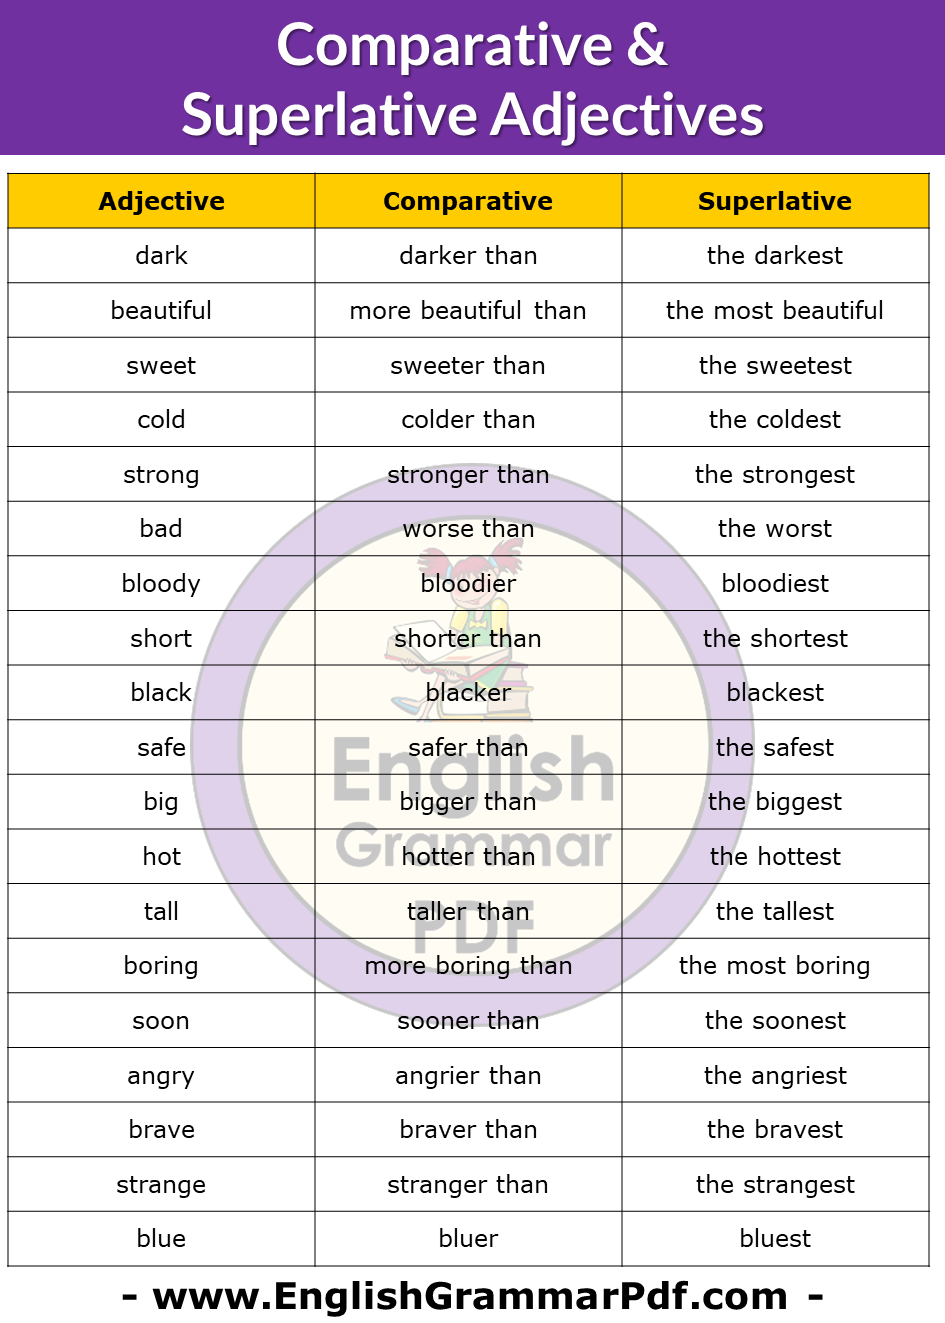 Comparative & Superlative Adjectives and Examples